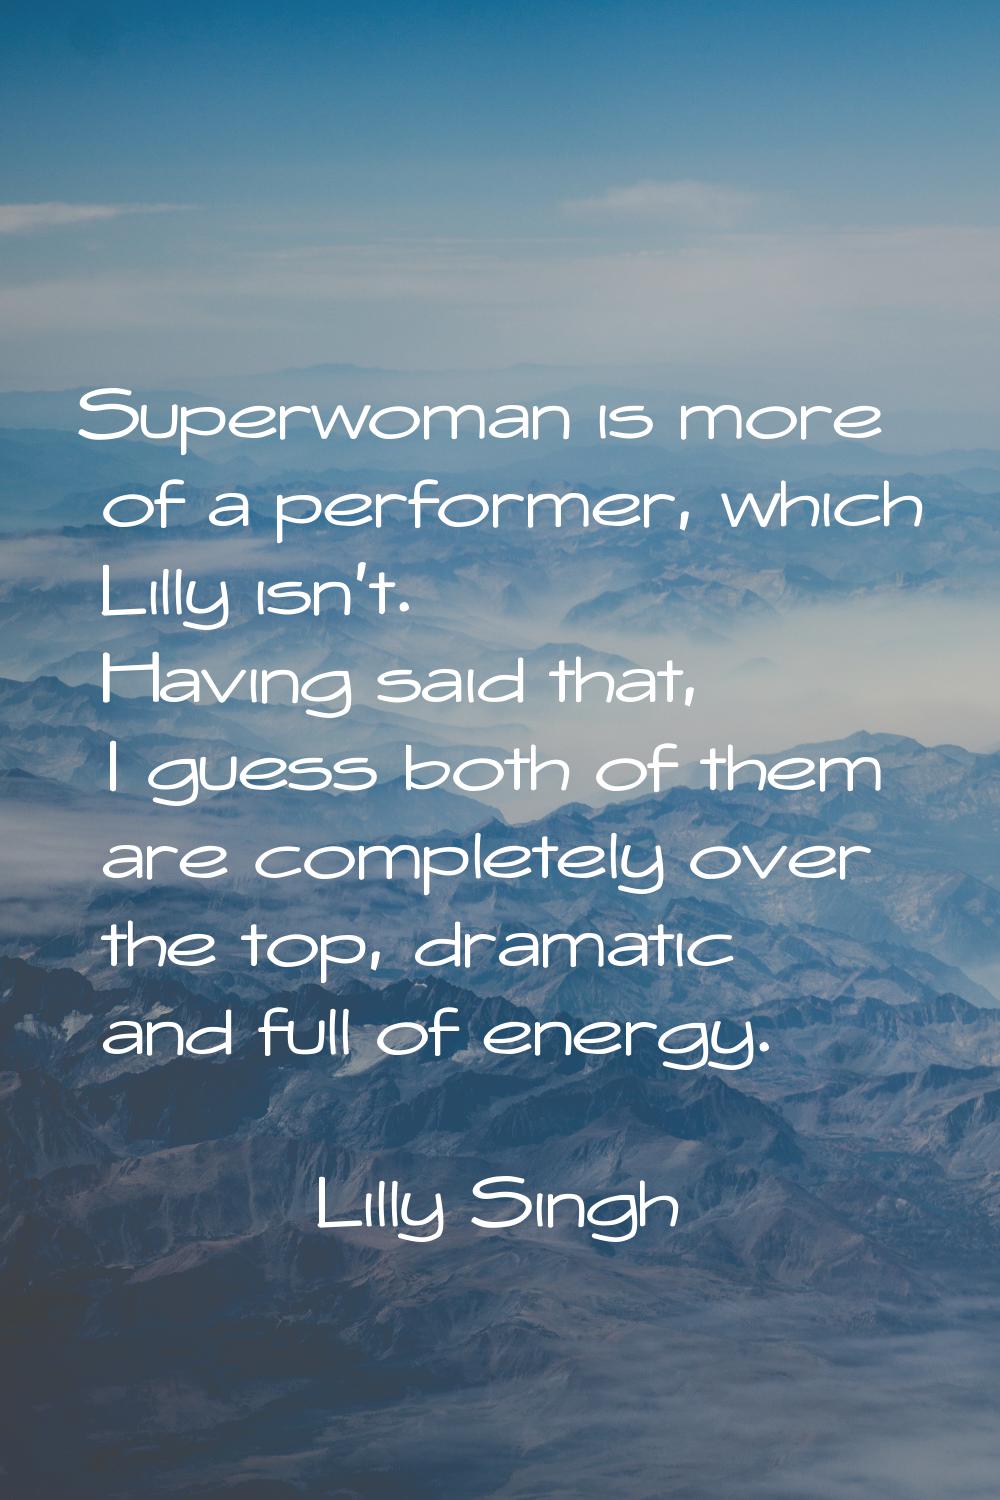 Superwoman is more of a performer, which Lilly isn't. Having said that, I guess both of them are co